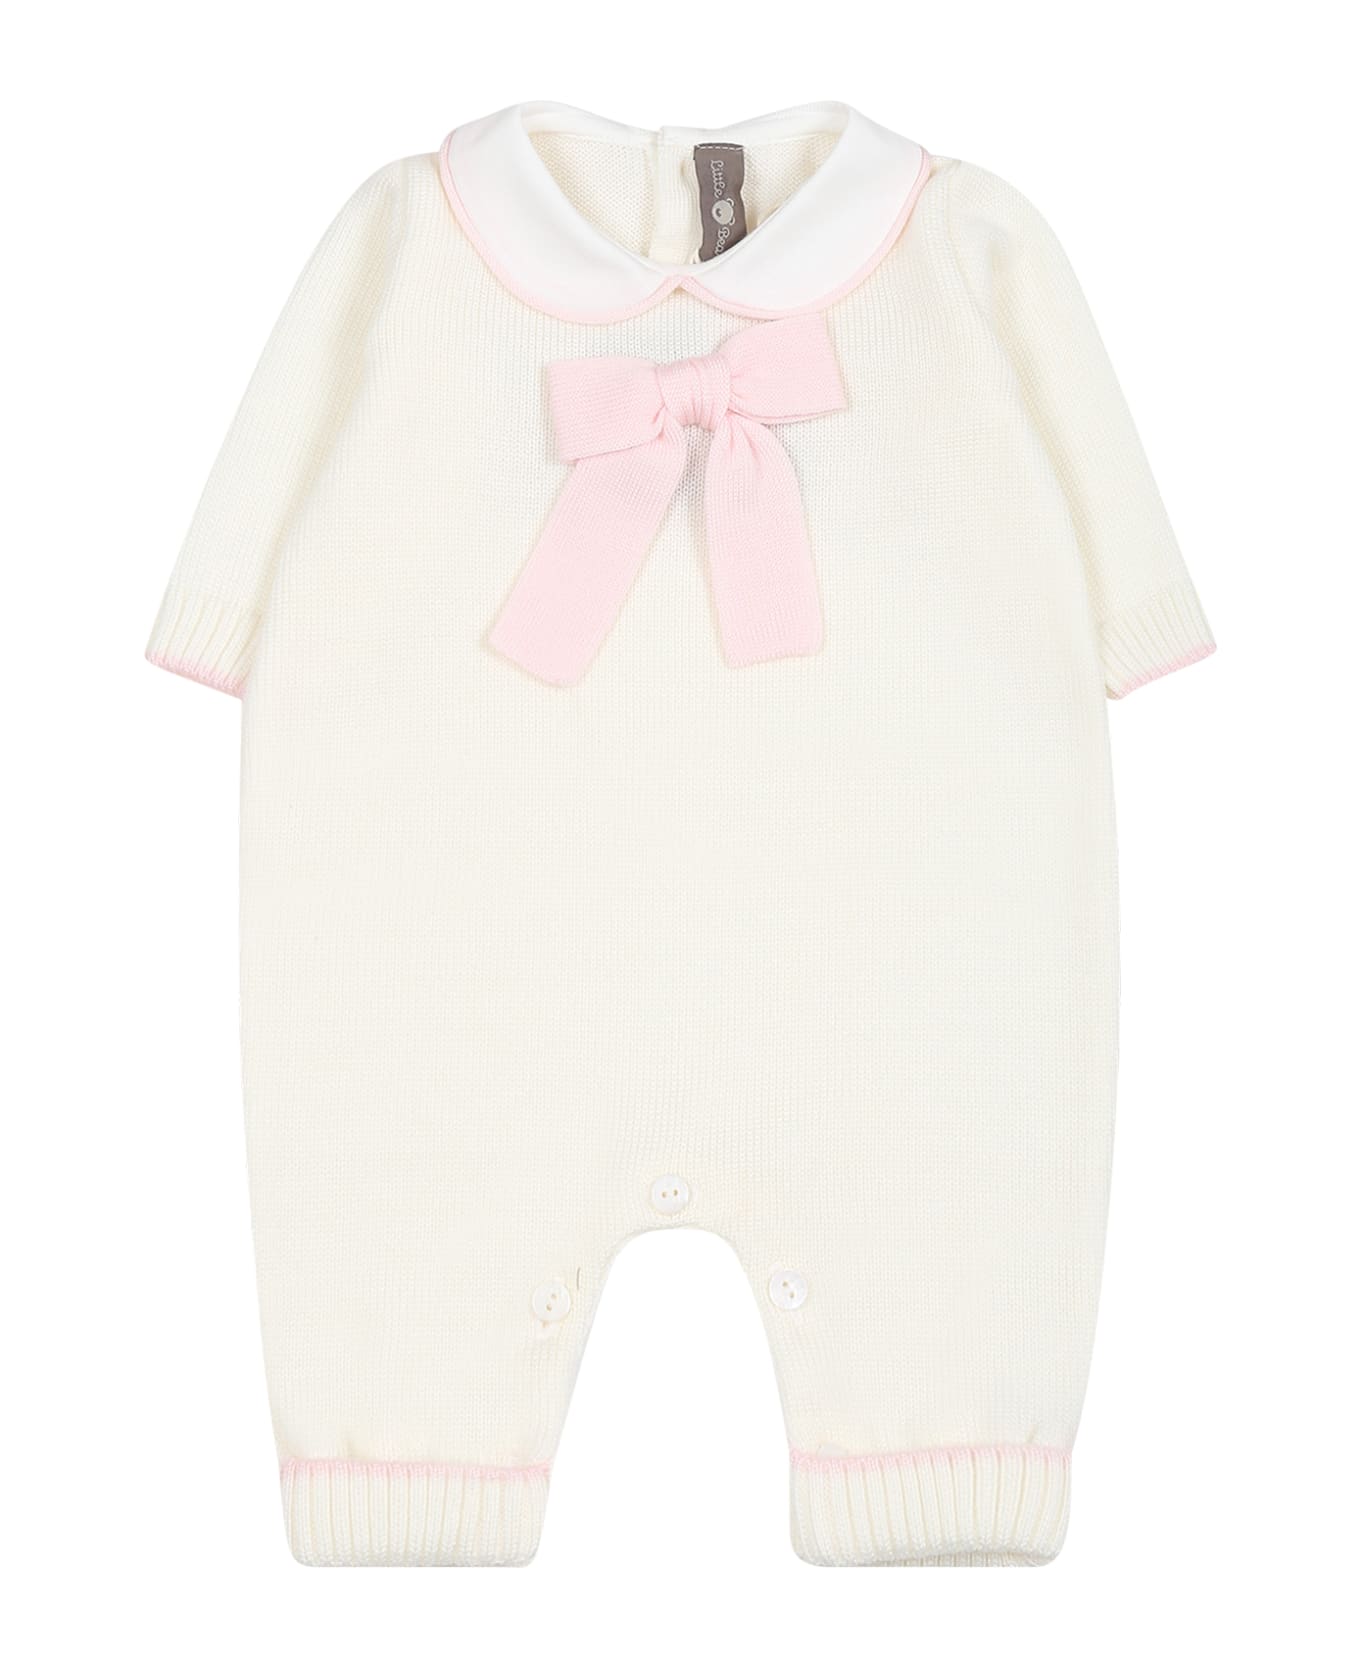 Little Bear Ivory Babygrow For Baby Girl With Bow - Latte/cipria